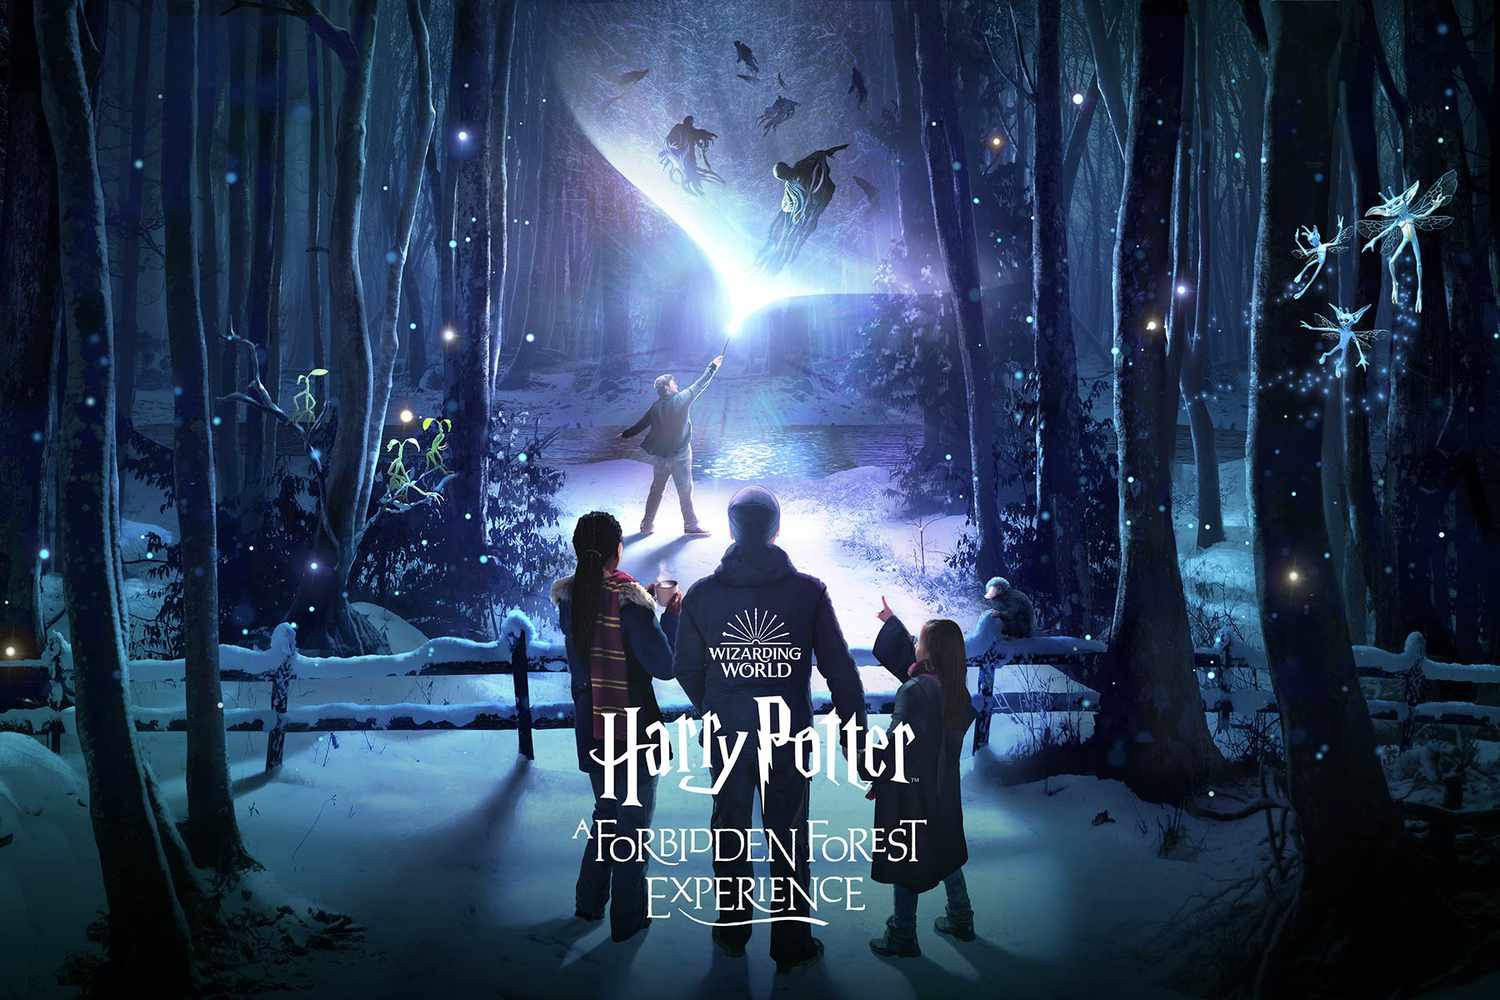 New York State Park Now Offers An Immersive Harry Potter Experience After Dark